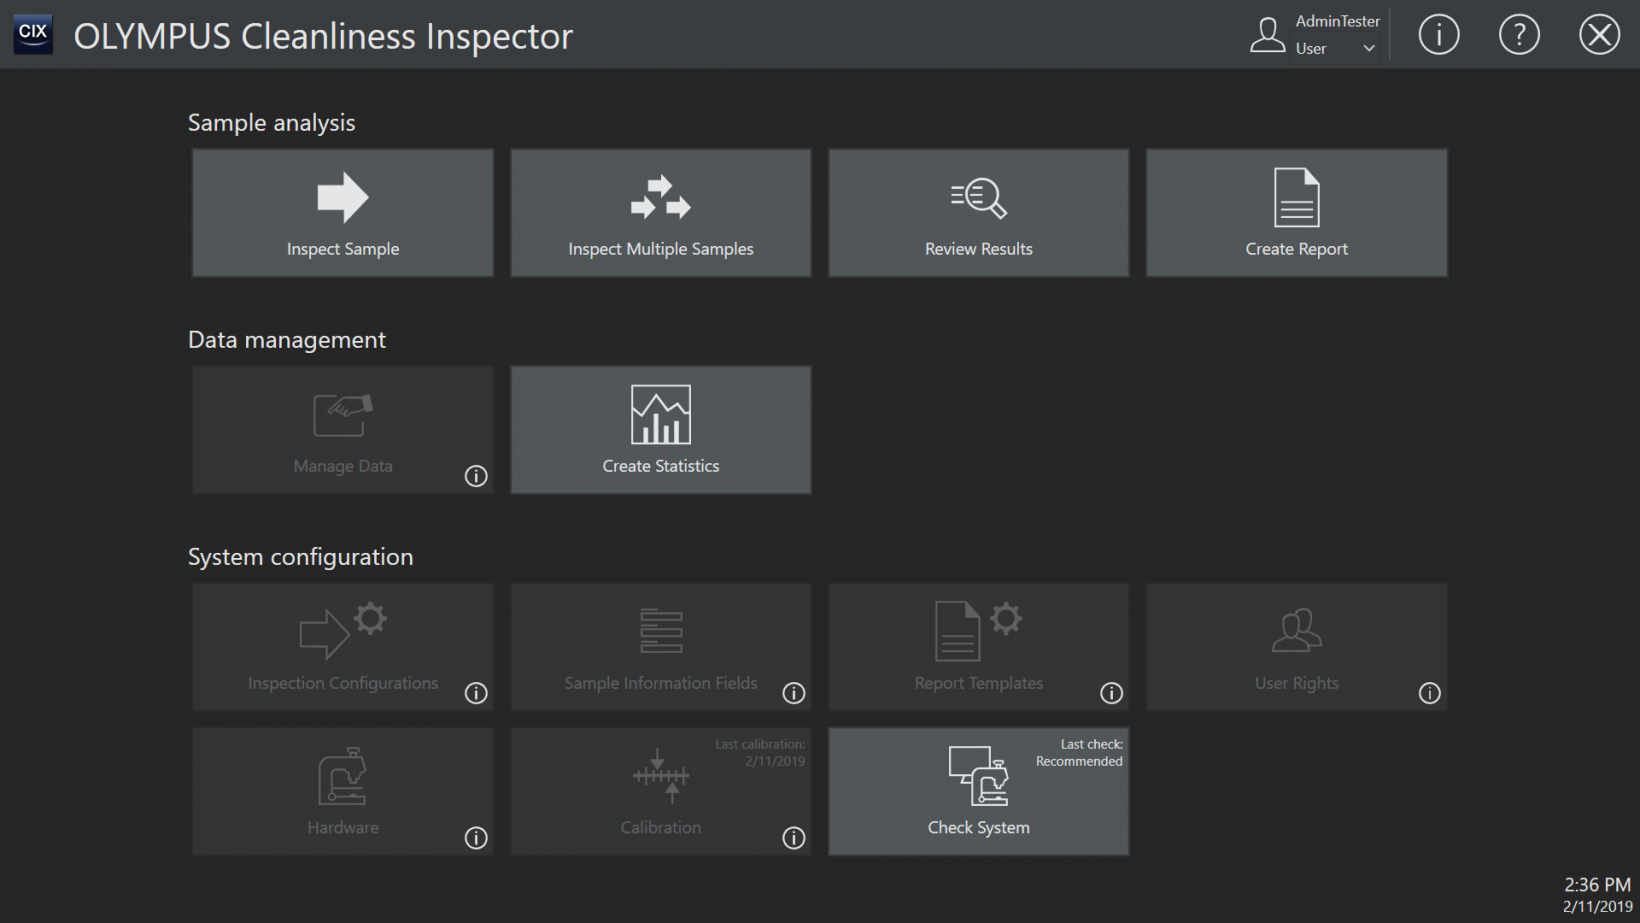 Cleanliness inspection system user interface